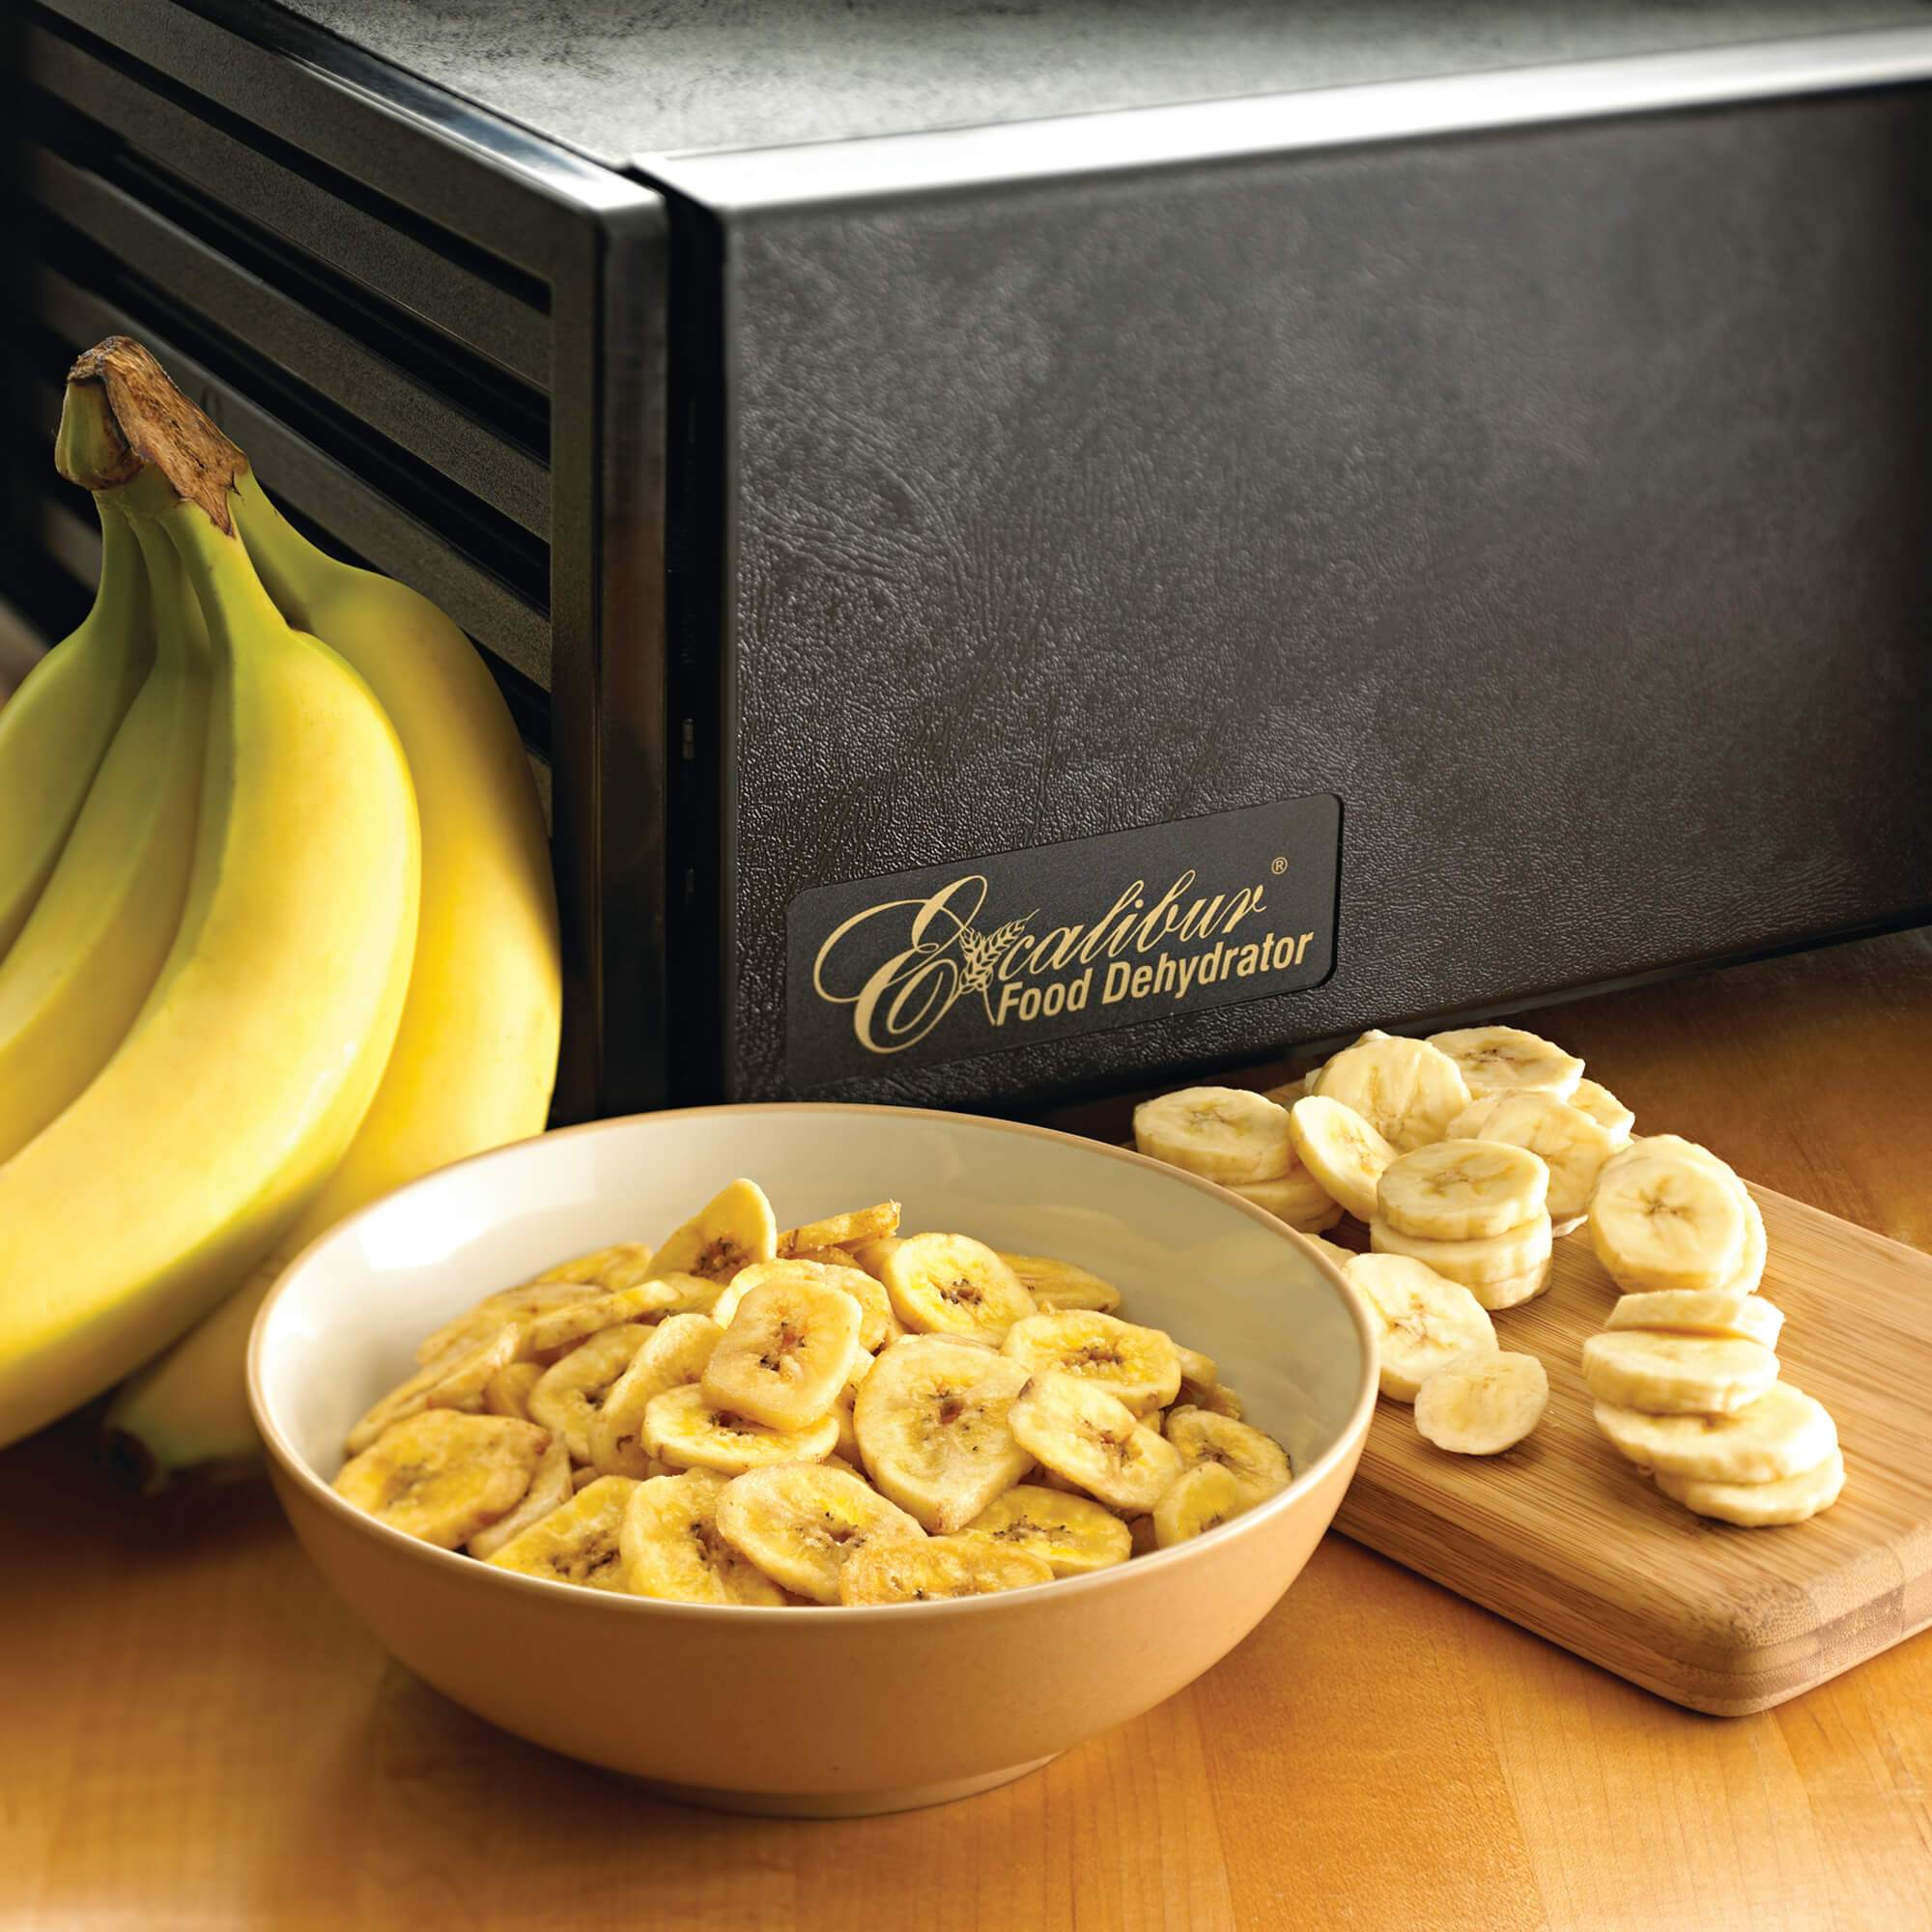 Excalibur 4500B 5 tray dehydrator with banana chips in a bowl.